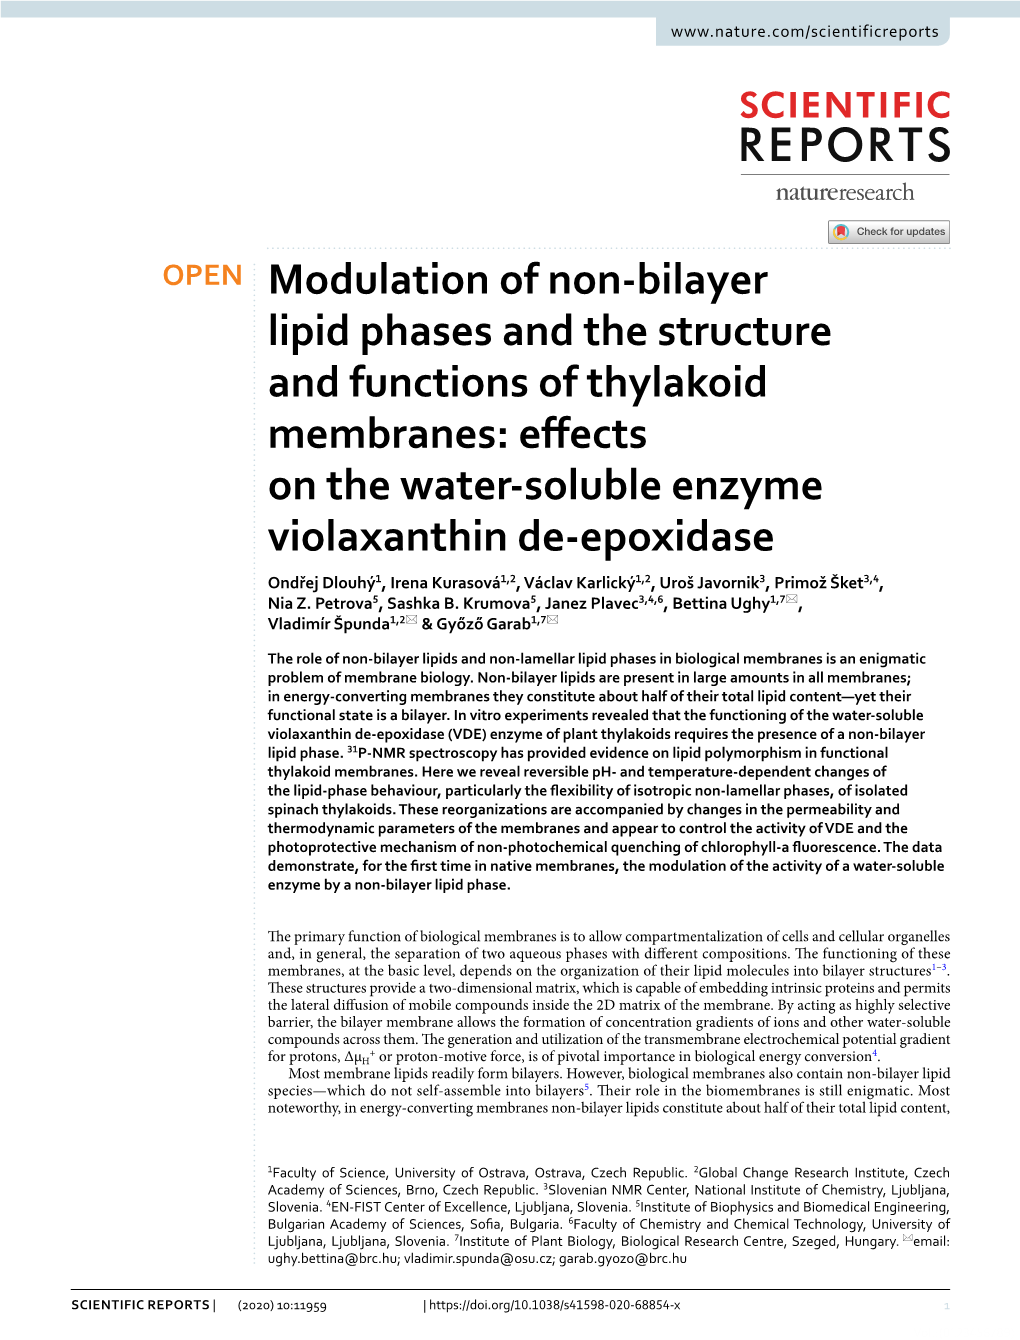 Modulation of Non-Bilayer Lipid Phases and the Structure And